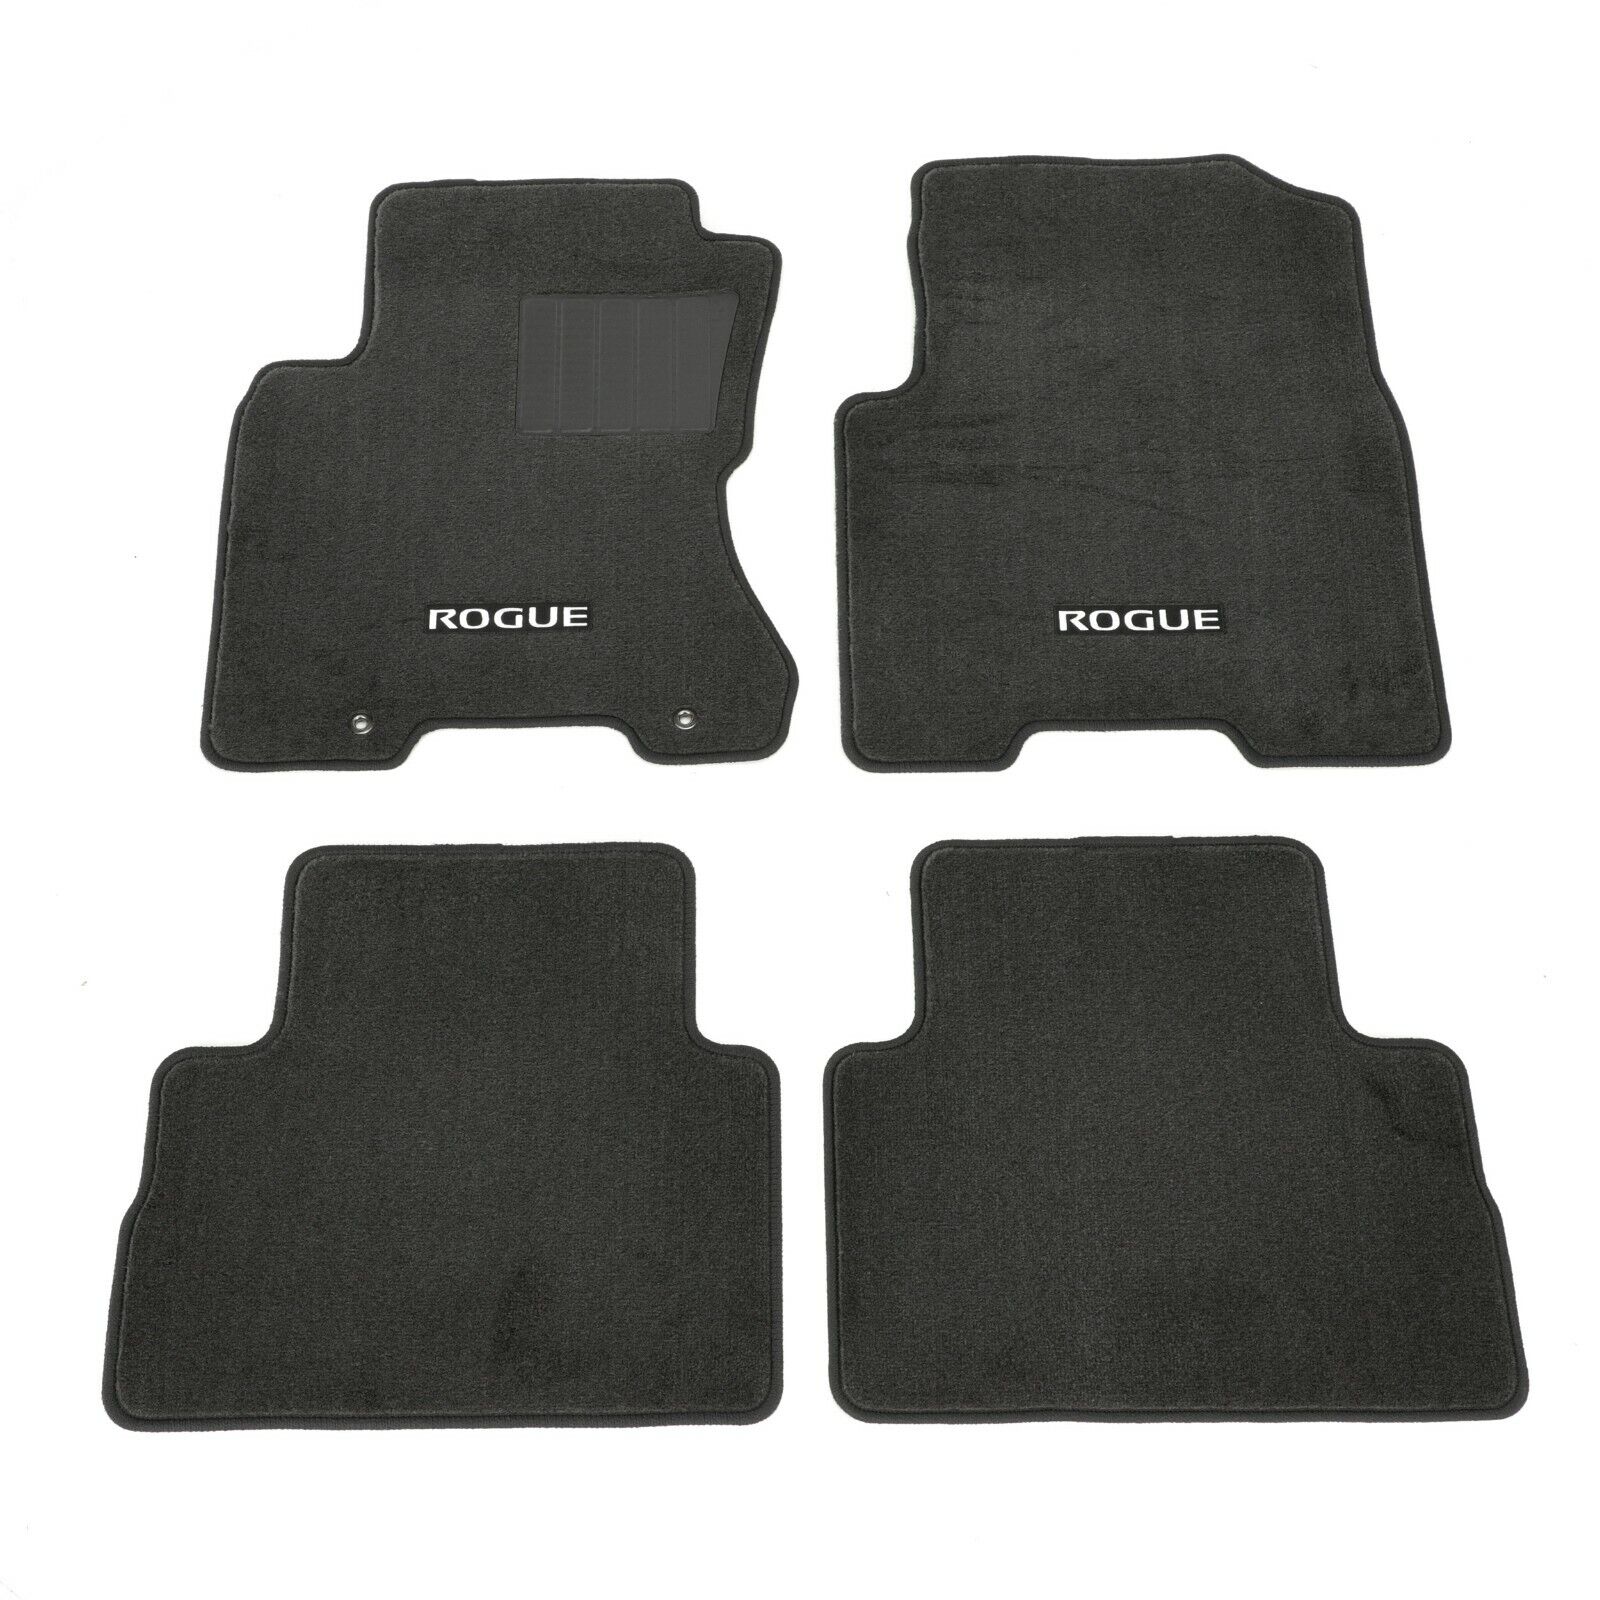 2008-2013 Nissan Rogue Black Carpeted Floor Mats Front & Rear Set Of 4 OEM NEW